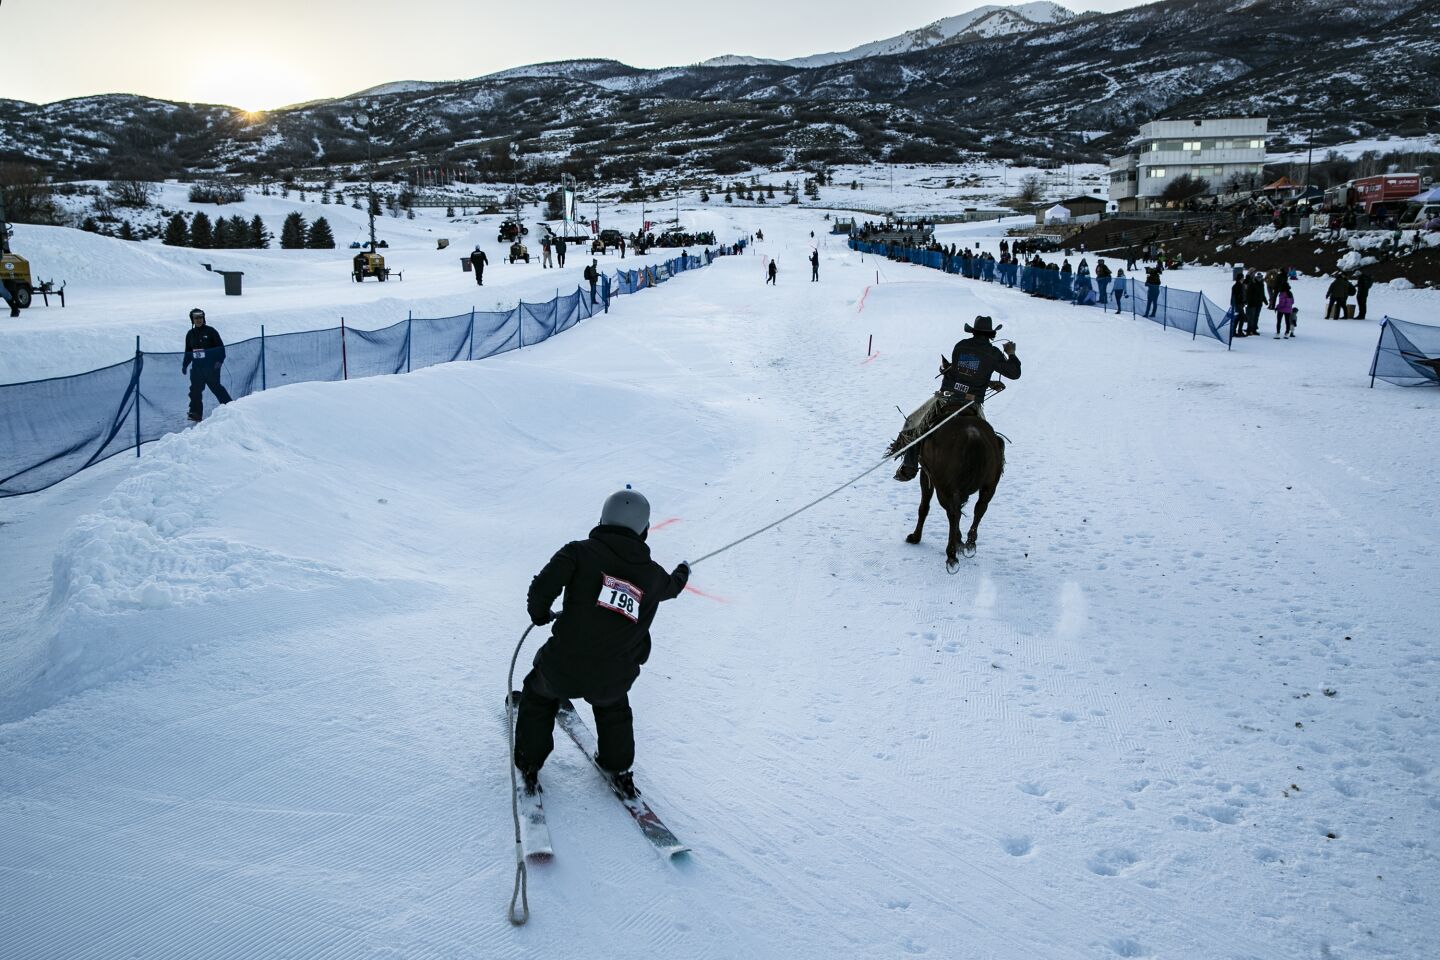 Joe Fellar is pulled by Bumper, ridden by Clayson Hutchings, in the Novice Division of Skijoring Utah.